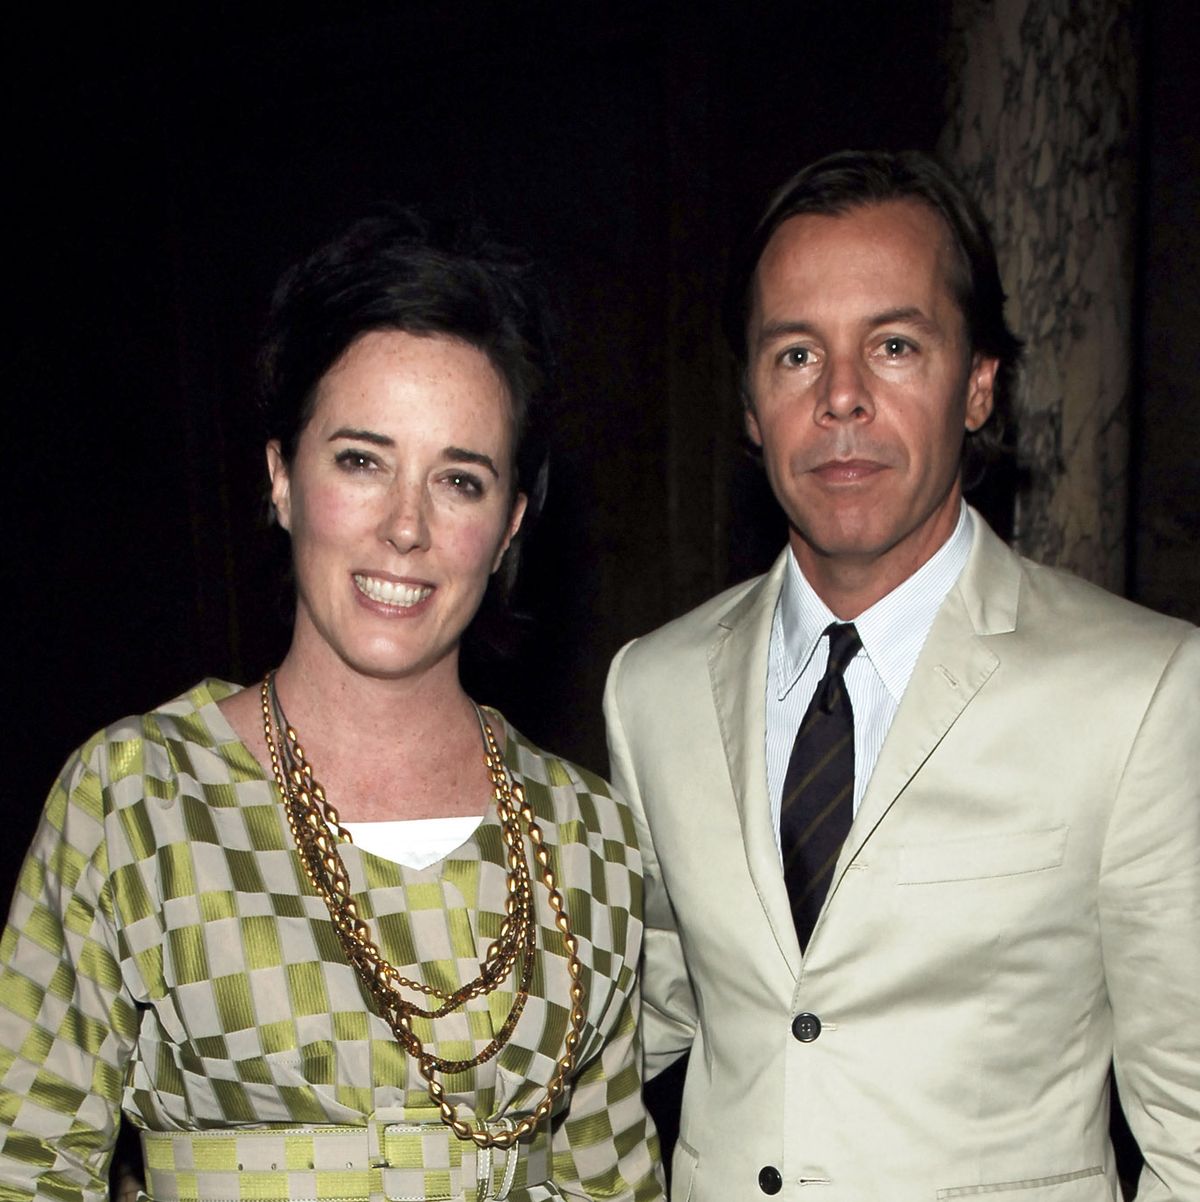 Andy Spade Breaks Silence After Wife Kate Spade's Death – NBC Palm